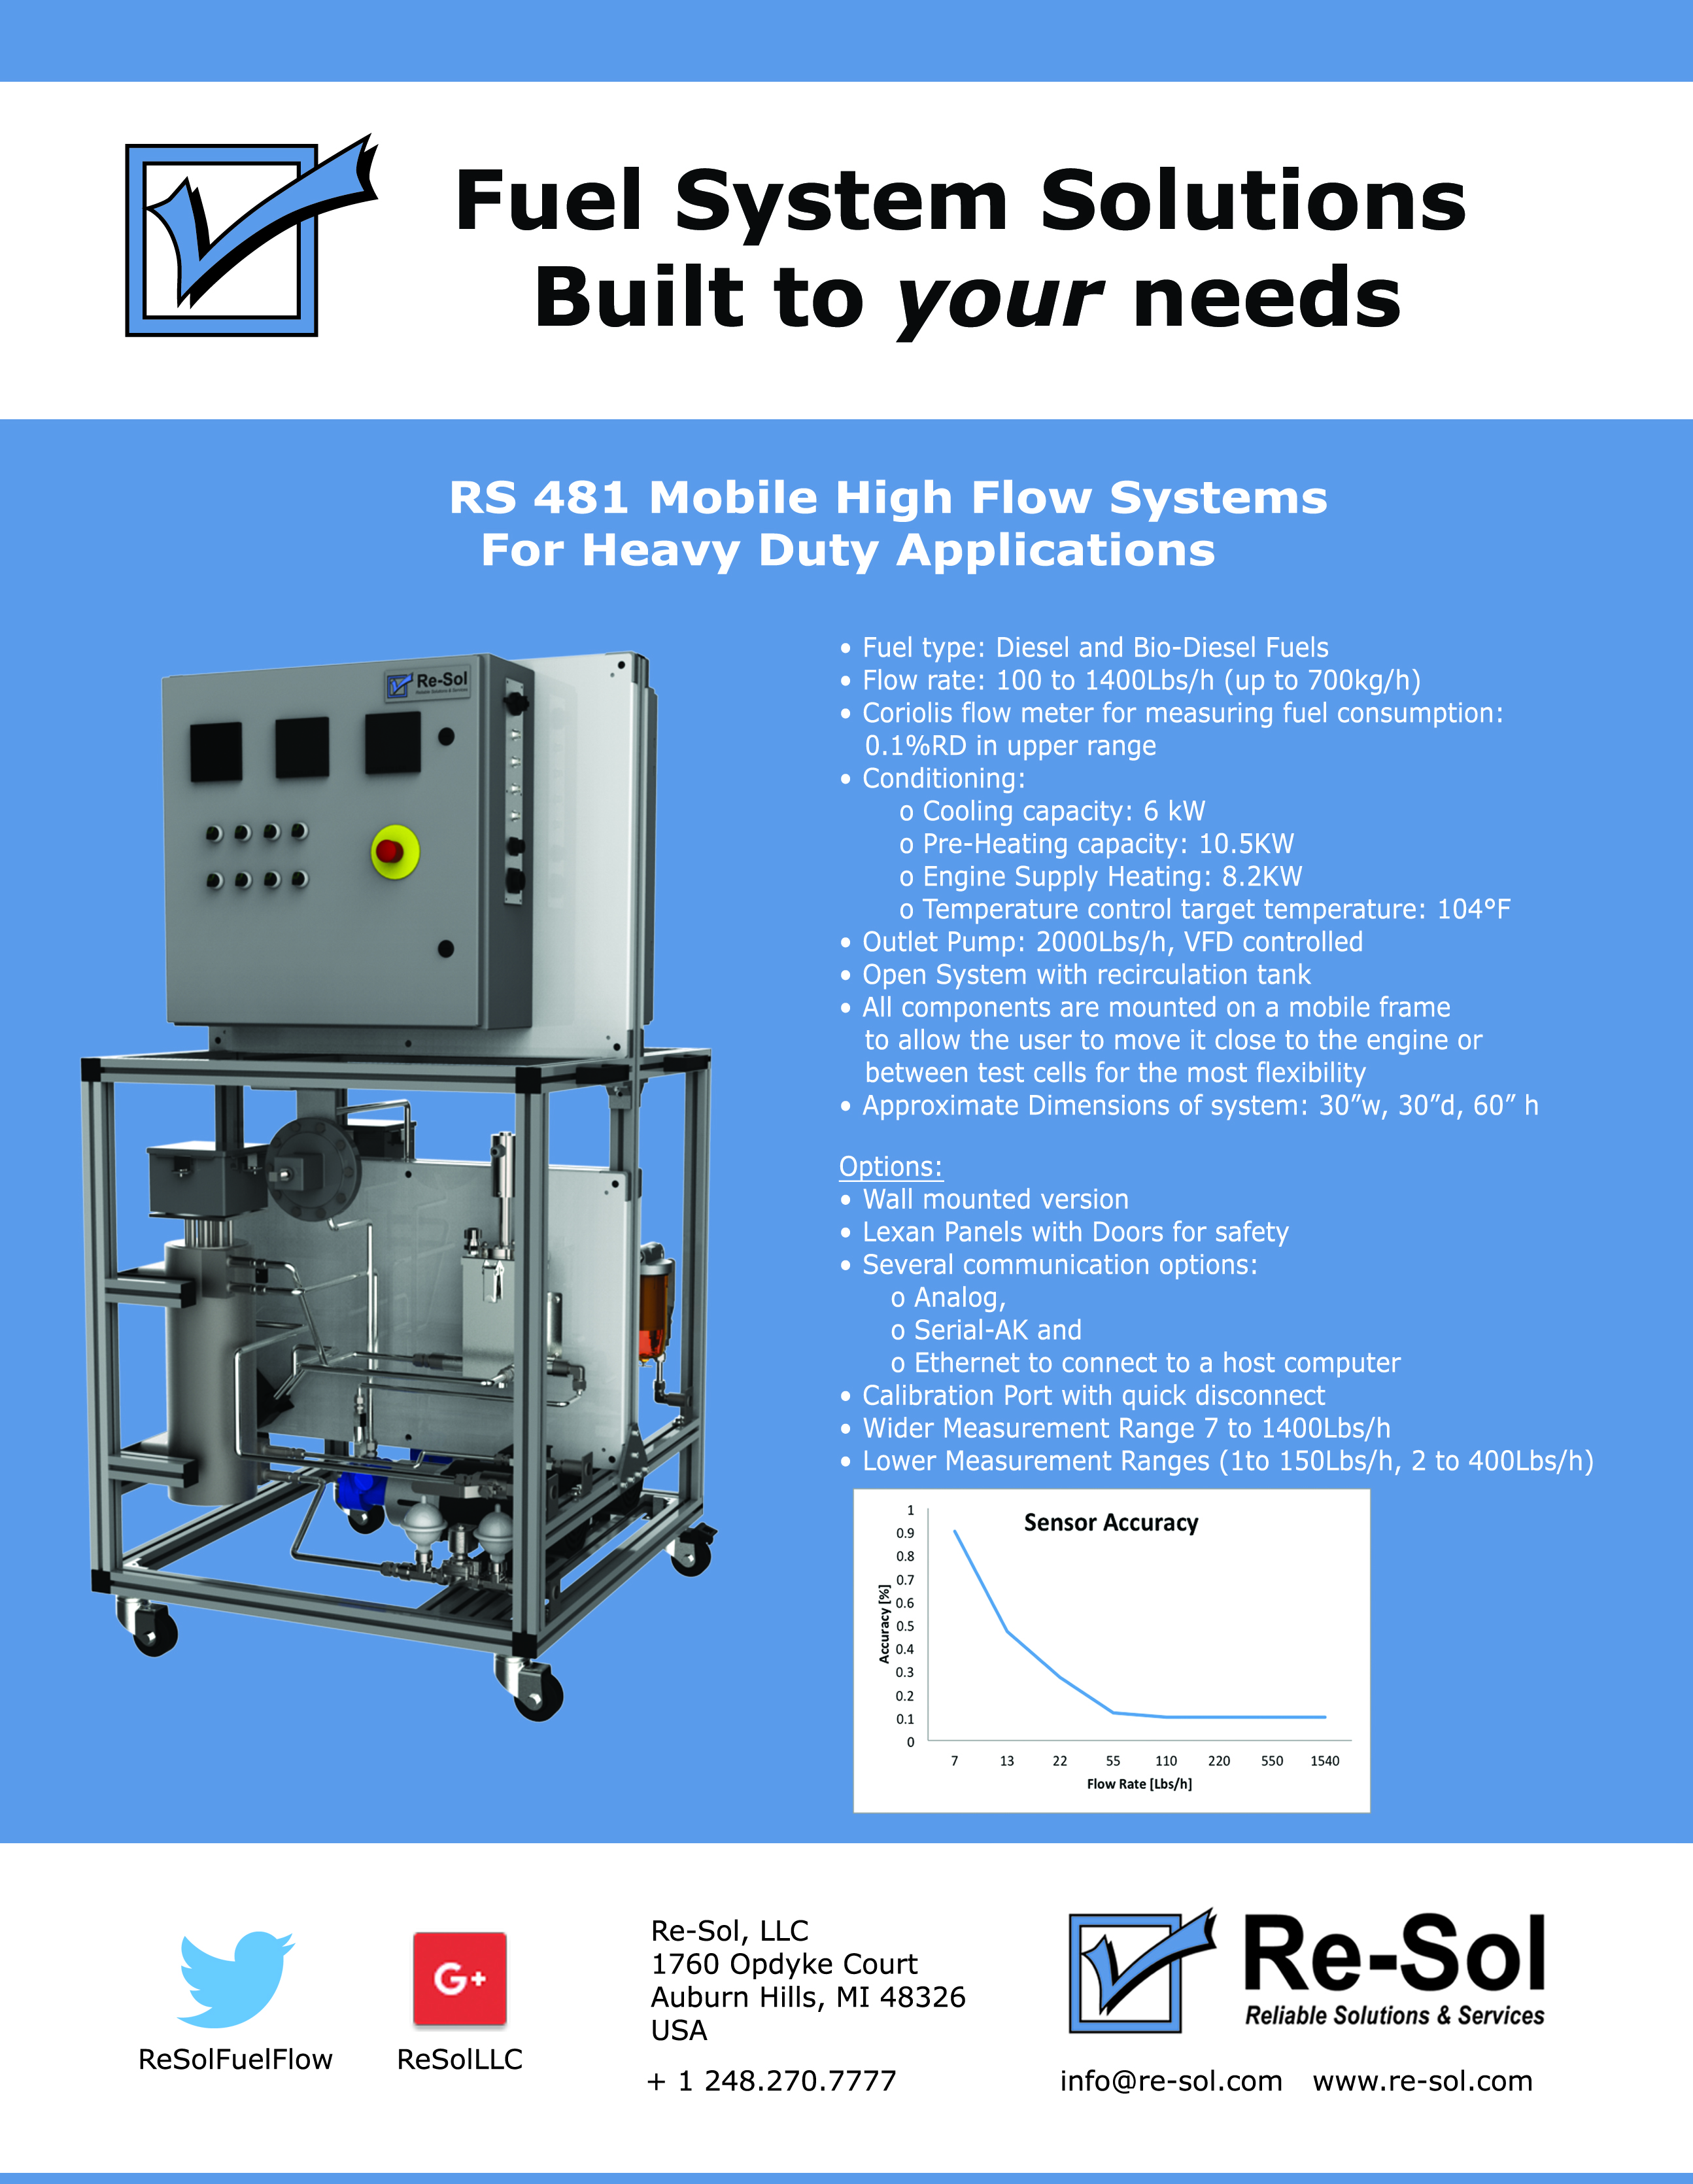 Mobile High Flow System, Heavy Duty Applications